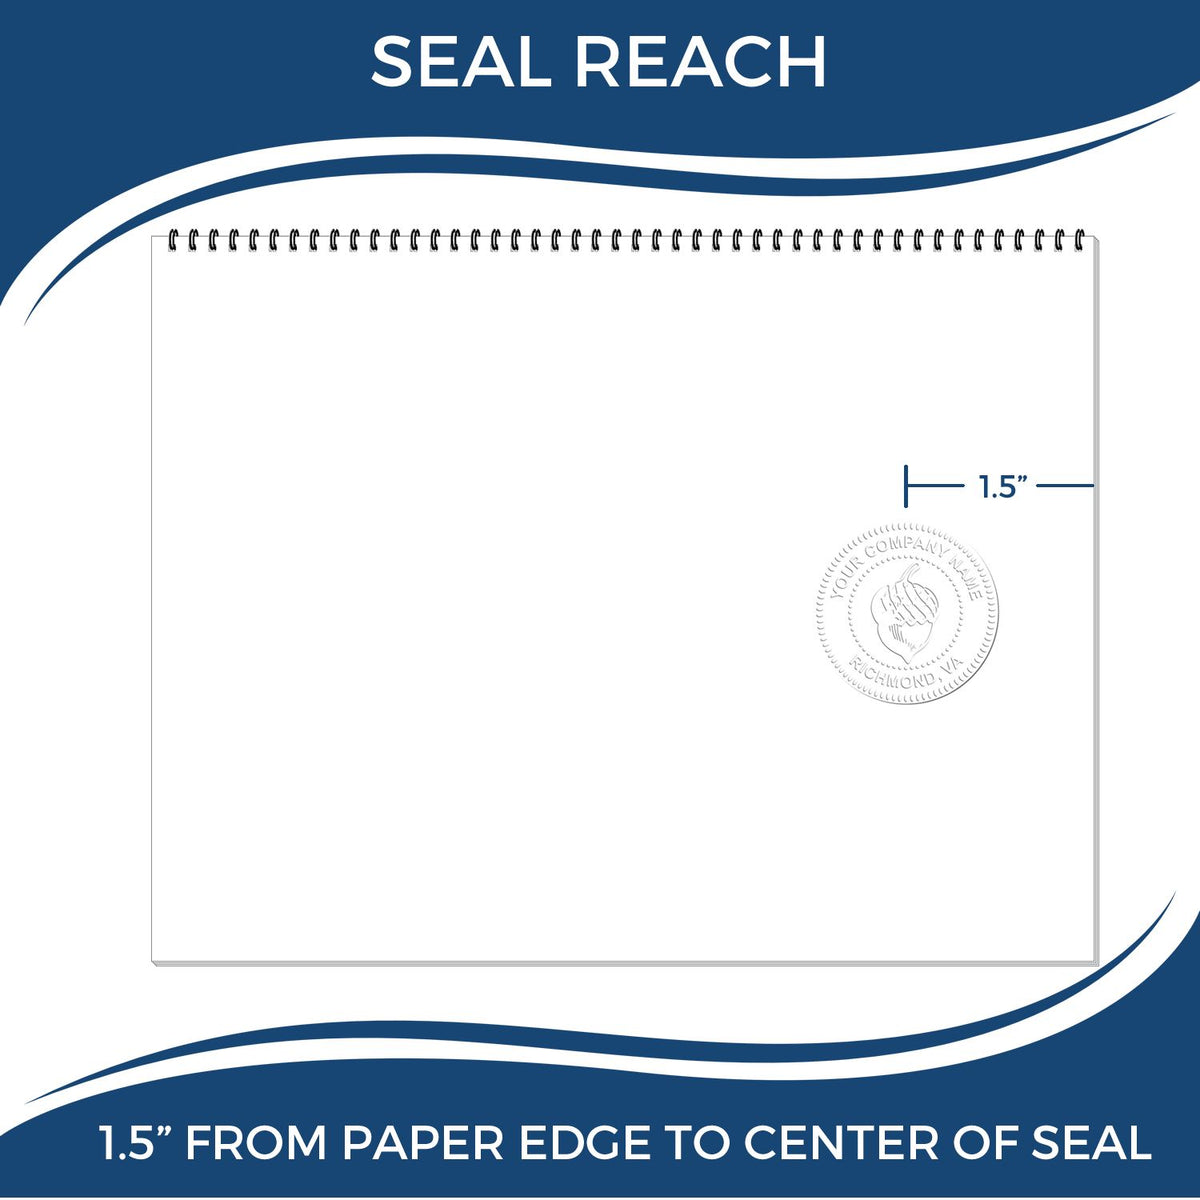 An infographic showing the seal reach which is represented by a ruler and a miniature seal image of the Gift Nevada Geologist Seal